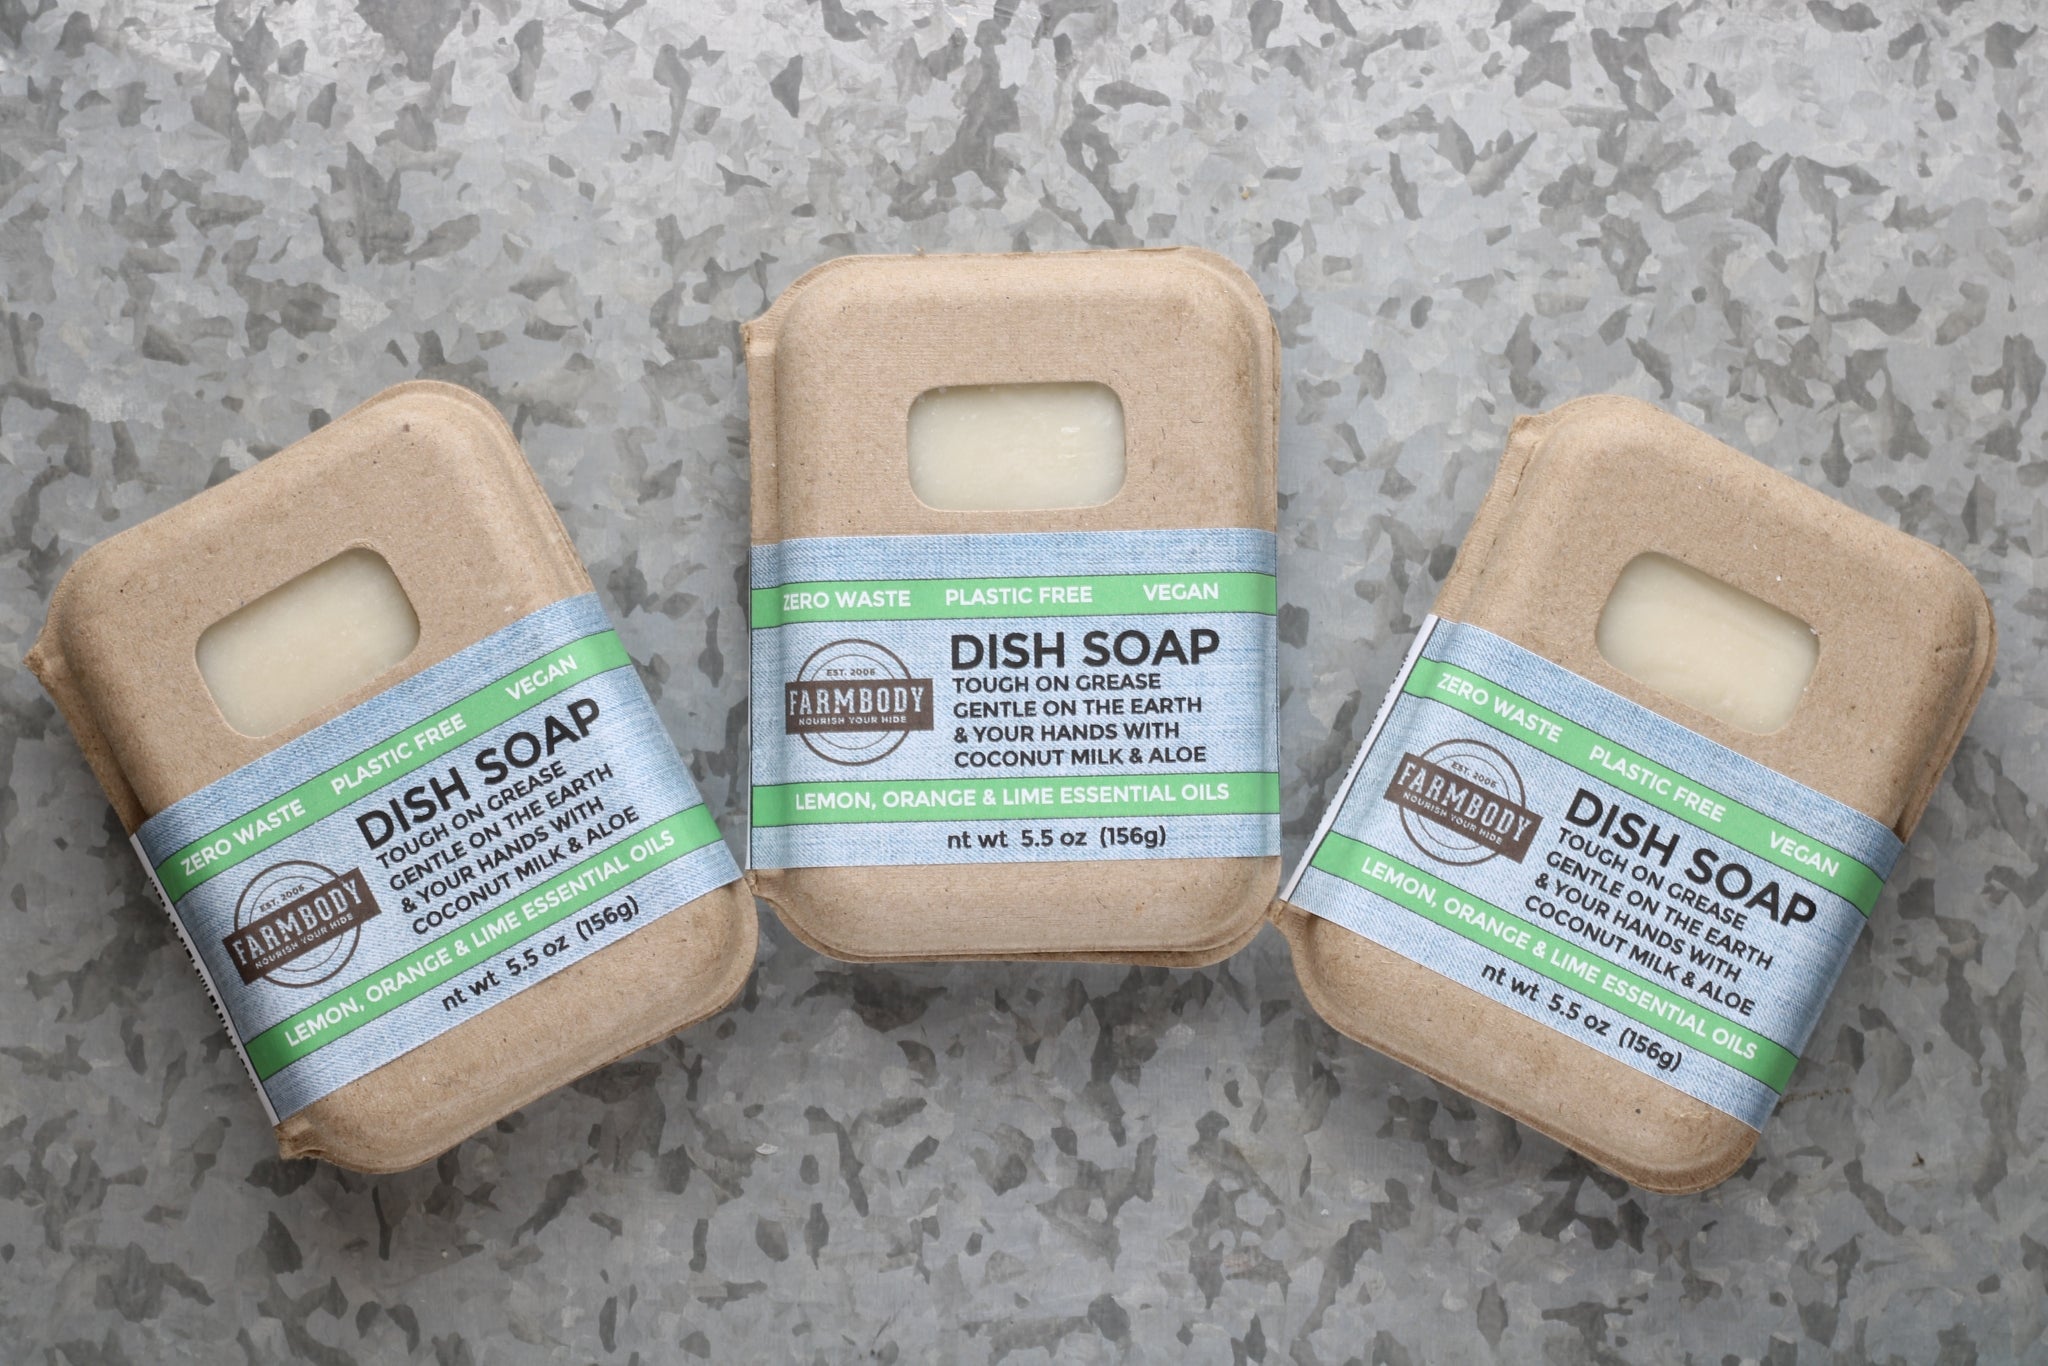 Farmbody Solid Dish Soap the Zero Waste Sustainable Way to do Dishes with Lemon Lime and Orange Essential Oils No Preservatives with Aloe and Coconut Milk Gentle on Hands